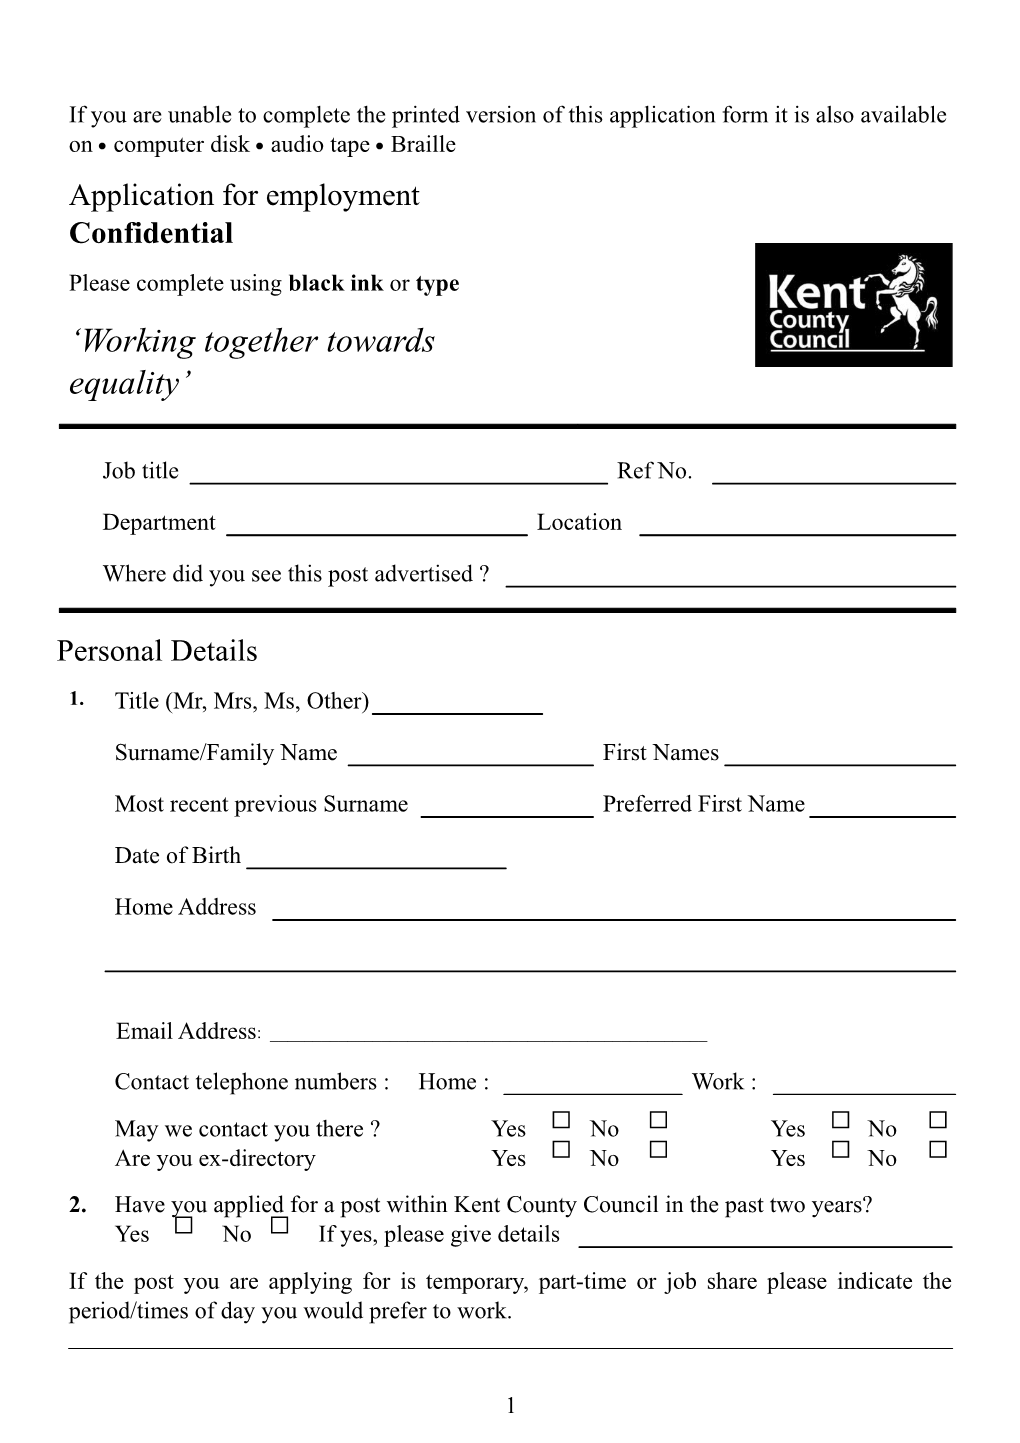 If You Are Unable to Complete the Printed Version of This Application Form It Is Also Available